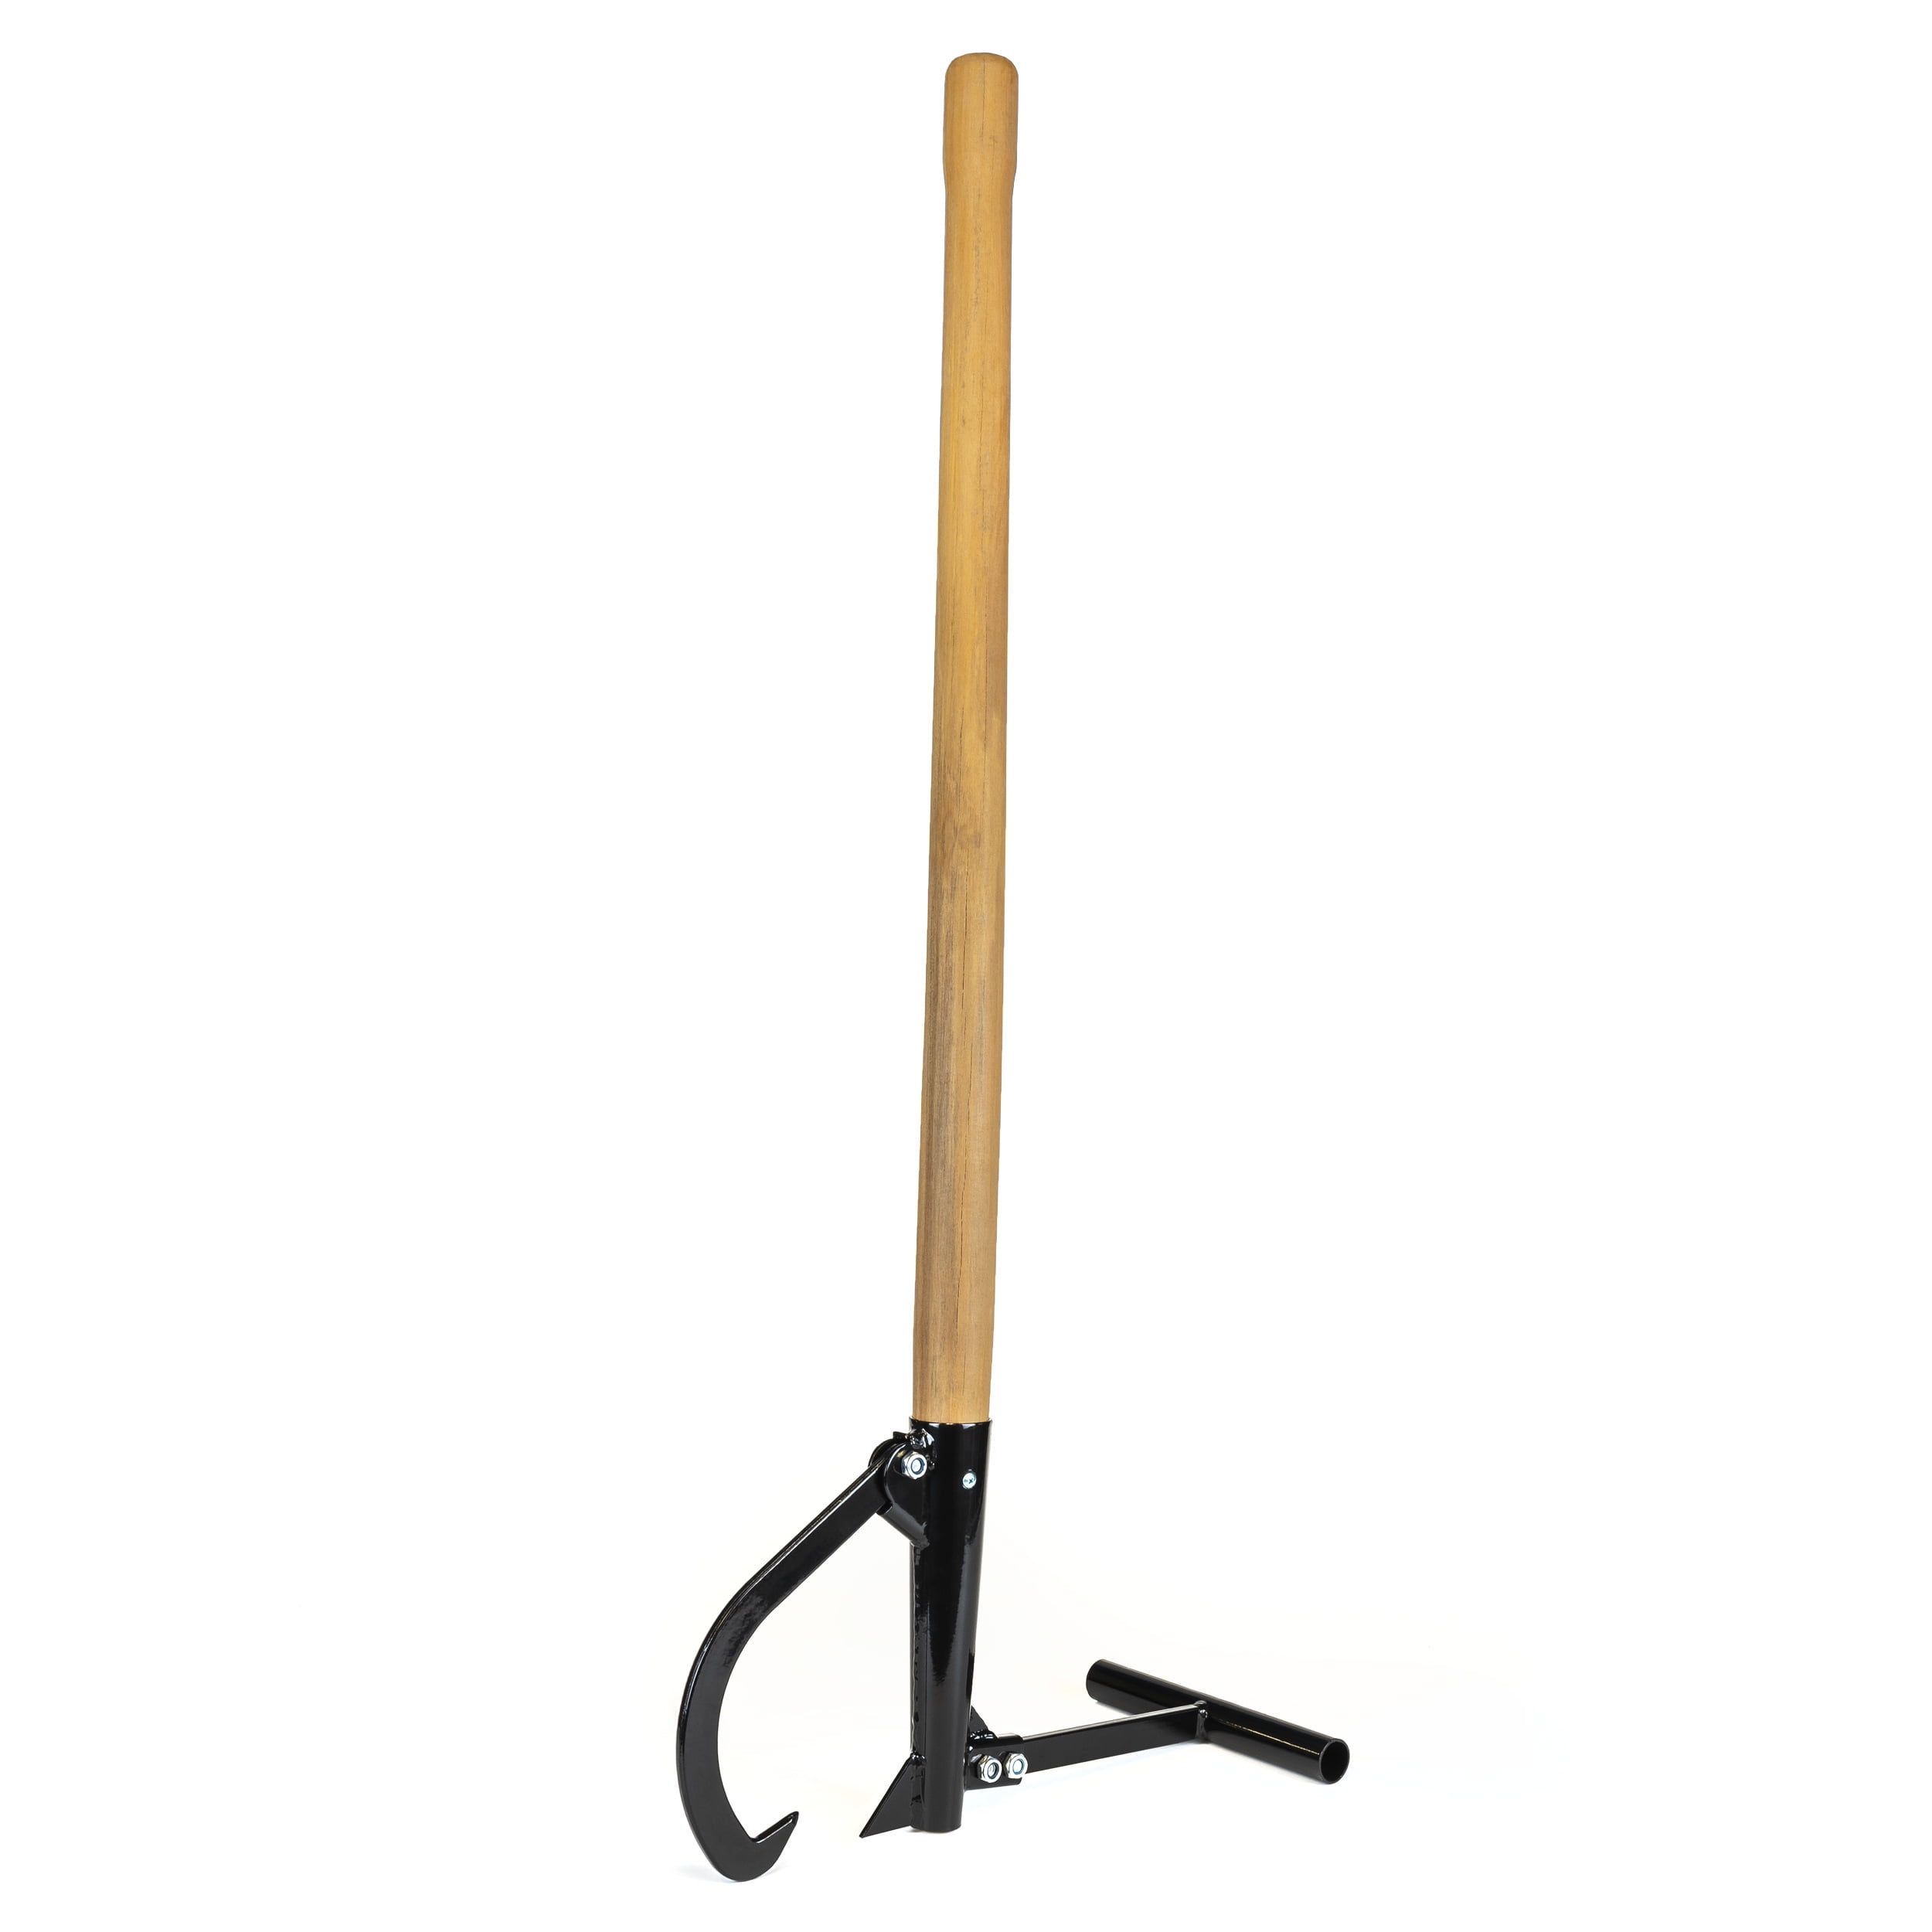 Up to 12" logs Timberjack Log Lifter Cant Hook Steel Handle 48" overall length 